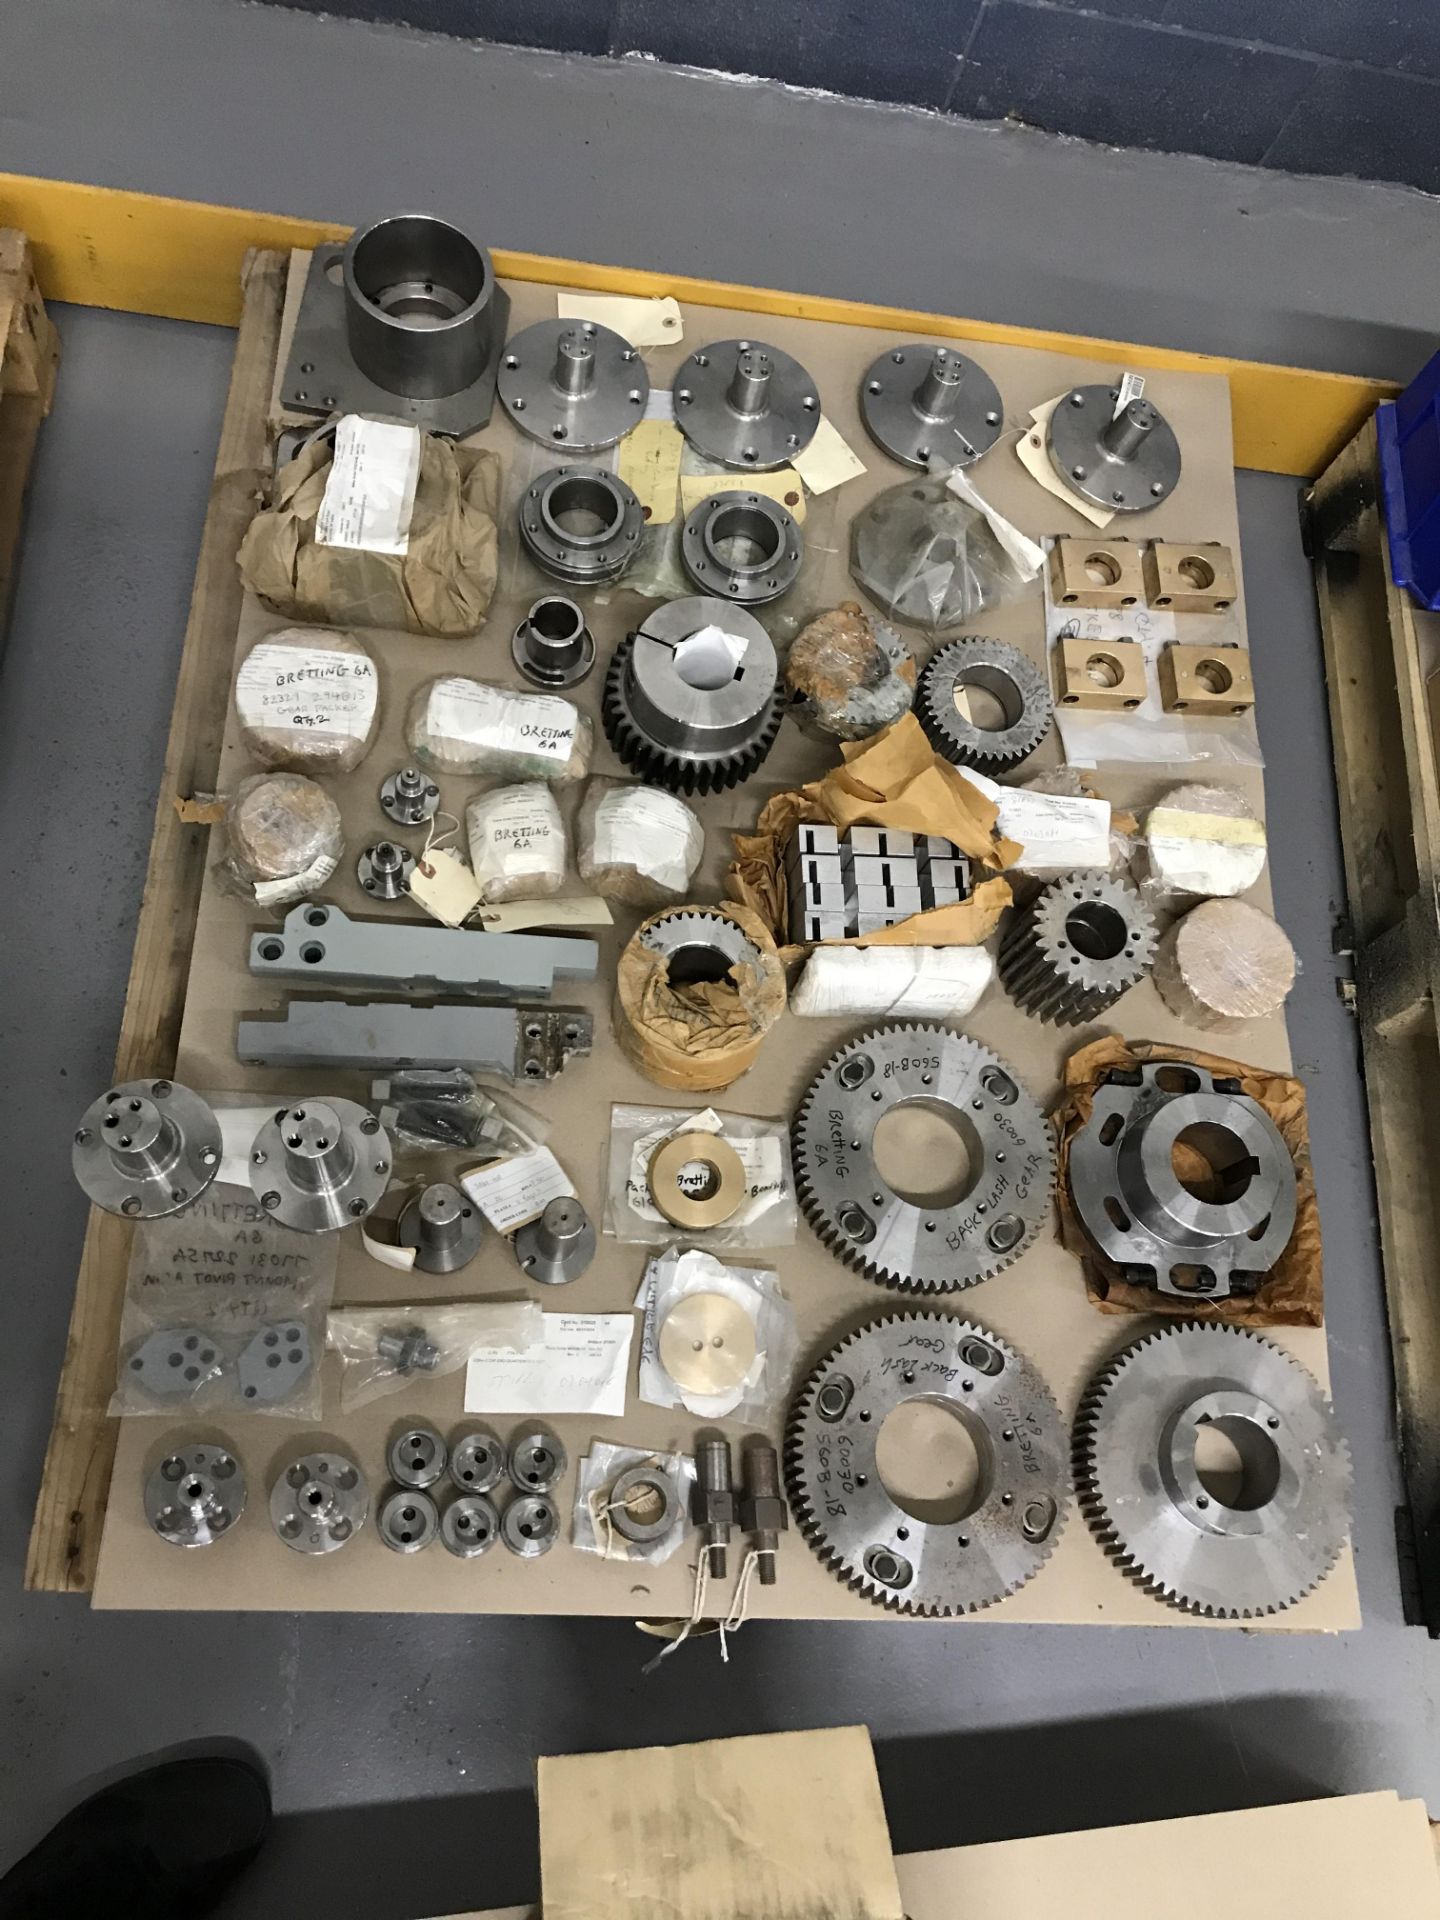 LOT OF SPARE PARTS FOR LAVAL 47, BRETTING UNWIND, FOLDER AND SEPARATOR (LAVAL 47) - Image 2 of 6